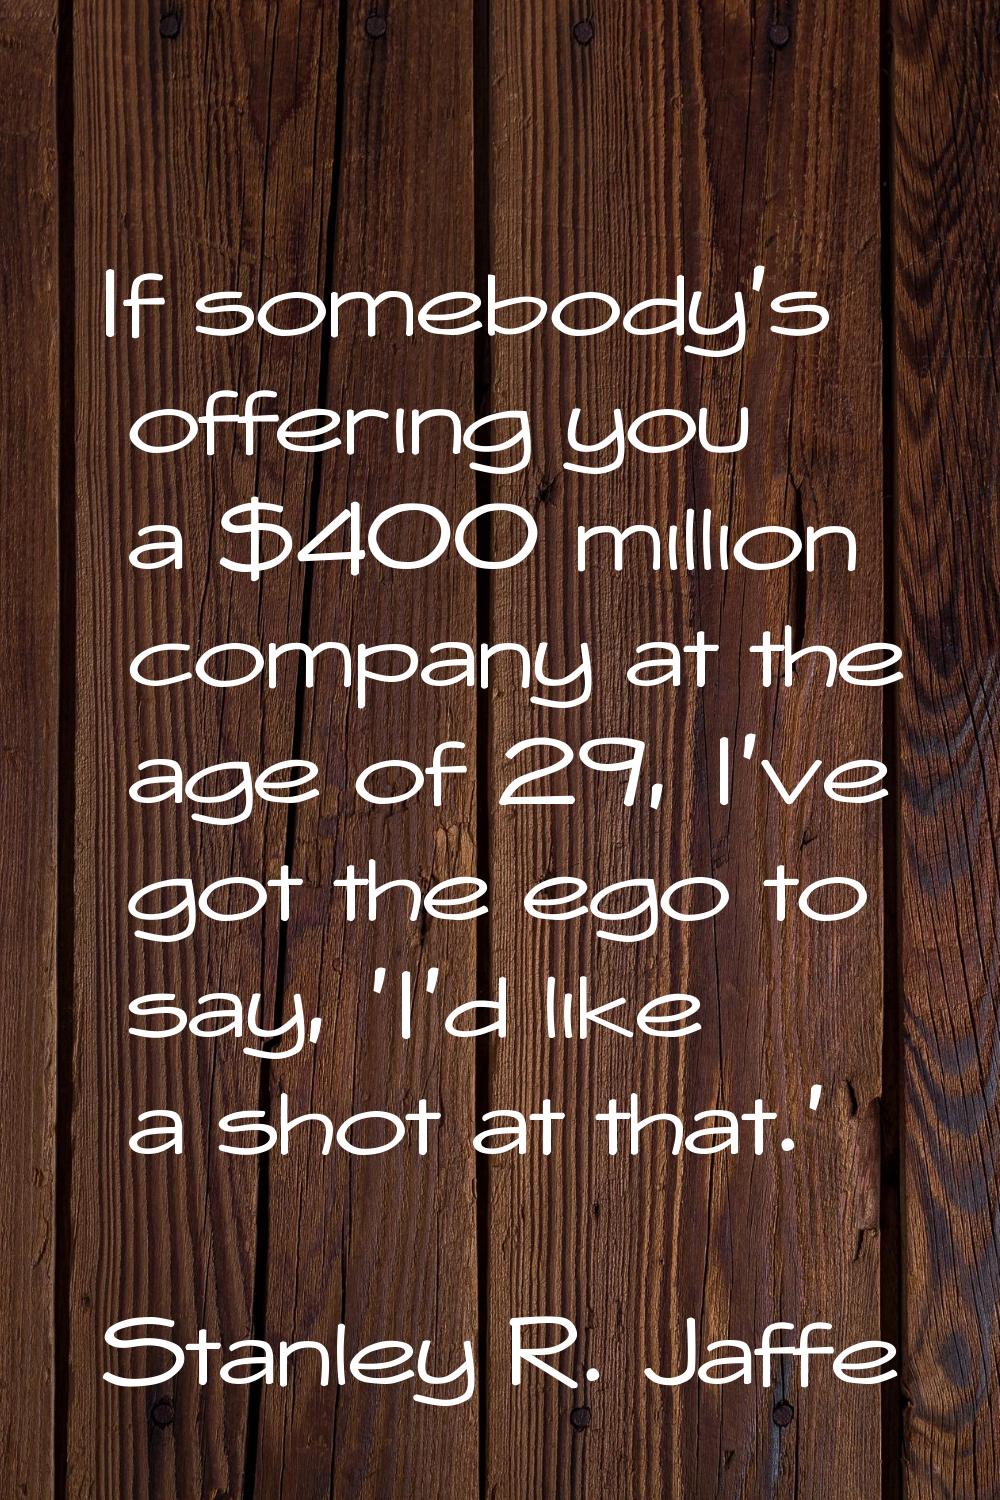 If somebody's offering you a $400 million company at the age of 29, I've got the ego to say, 'I'd l